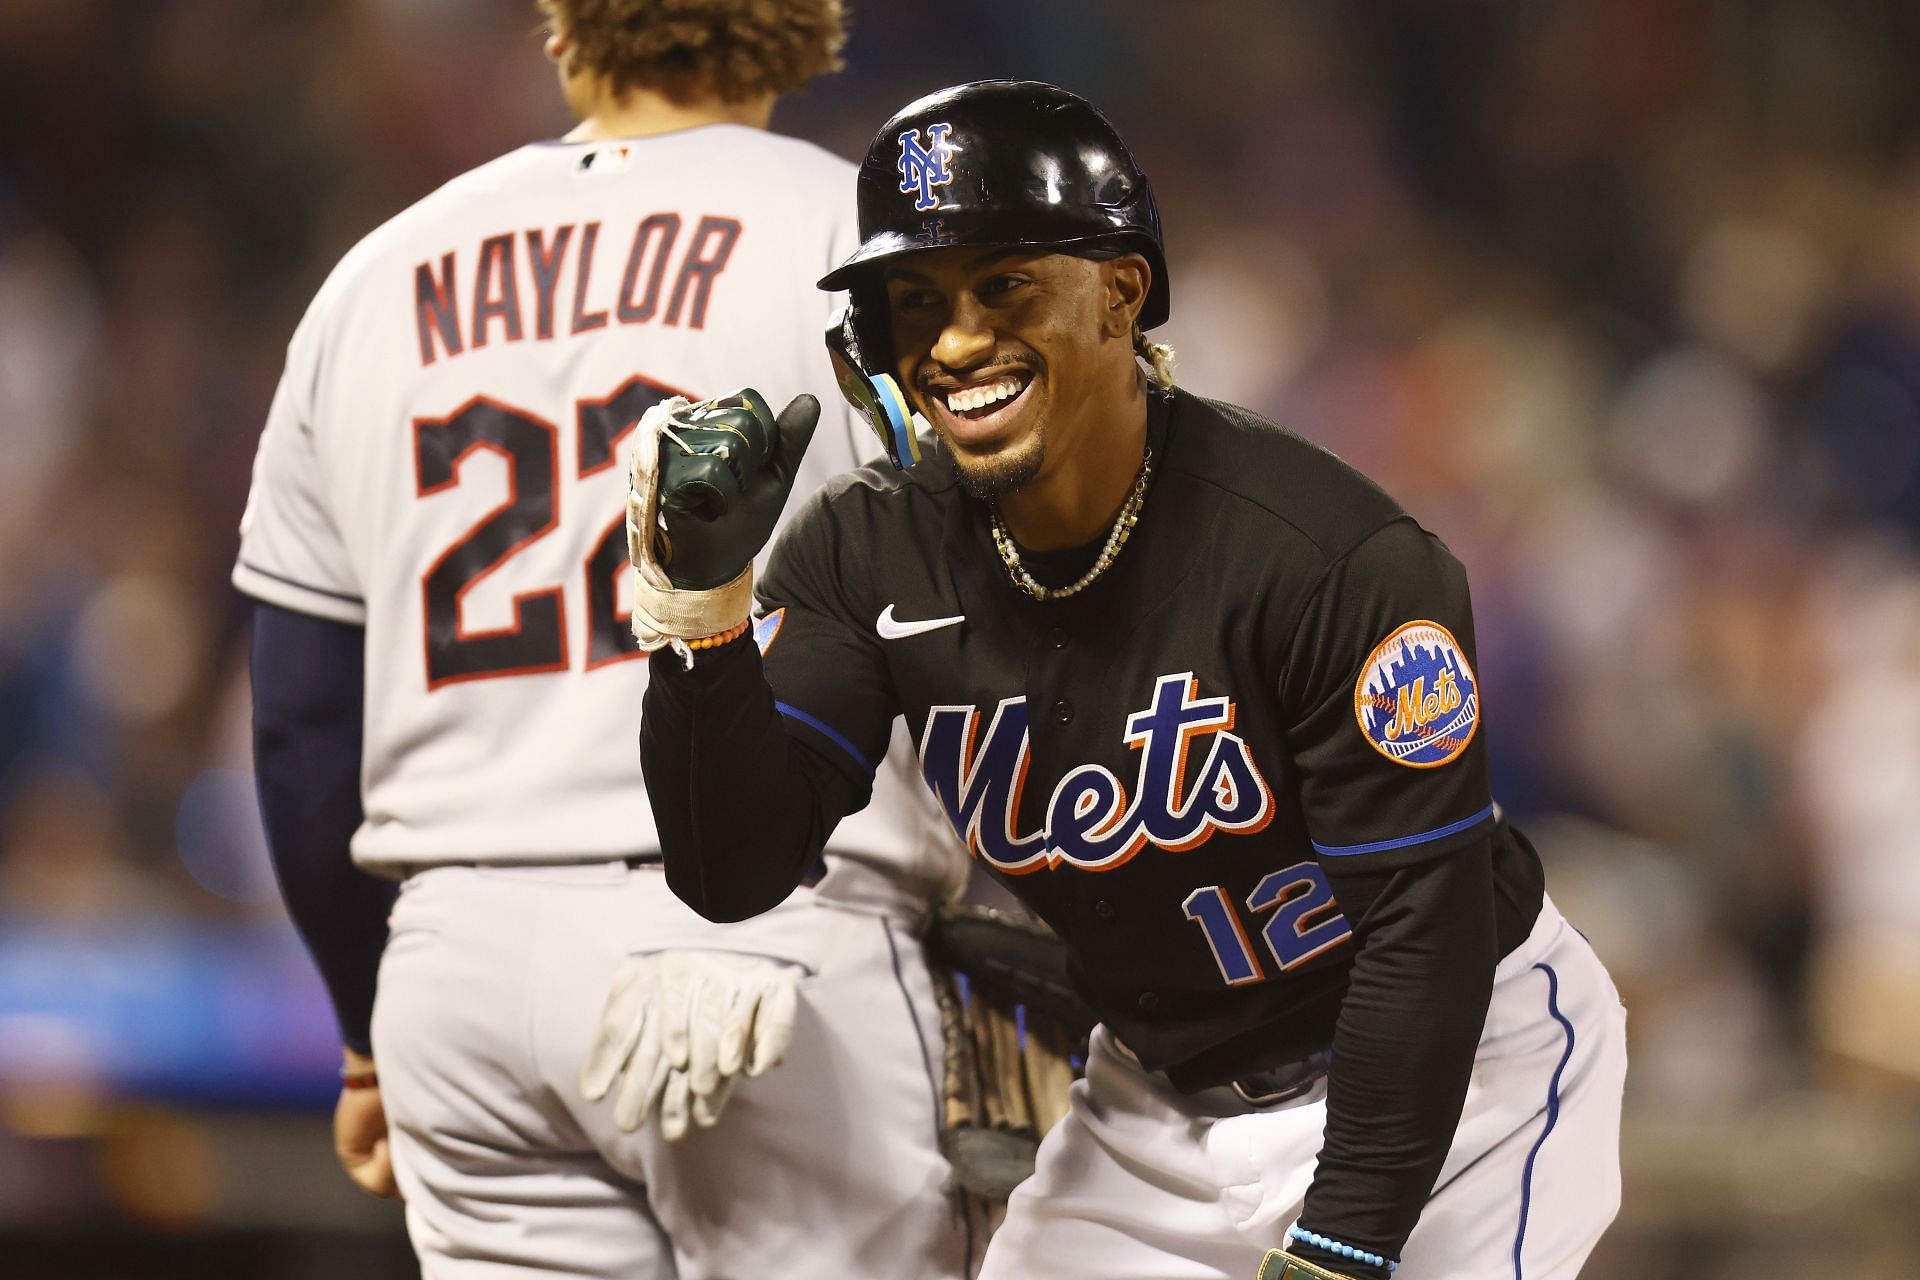 NY Mets shortstop Francisco Lindor cautious with celebrations